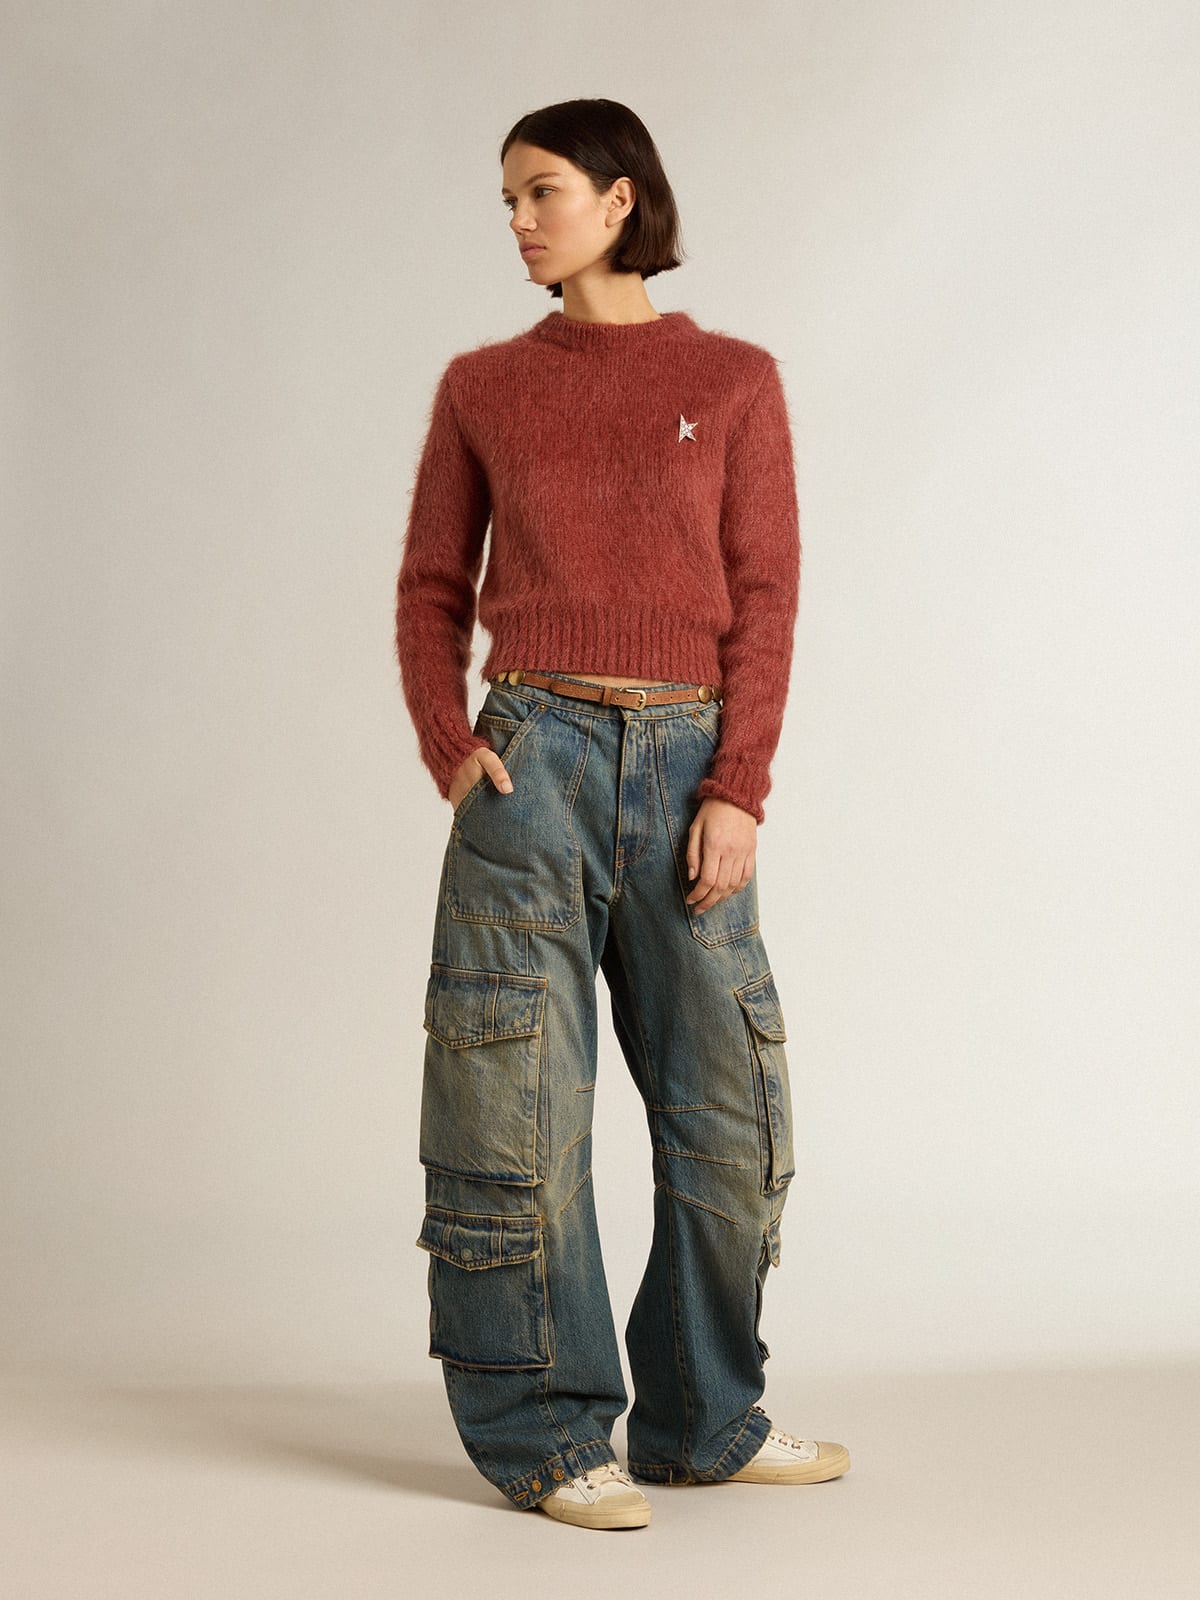 Golden Goose - Maglione cropped in mohair color lilla scuro in 